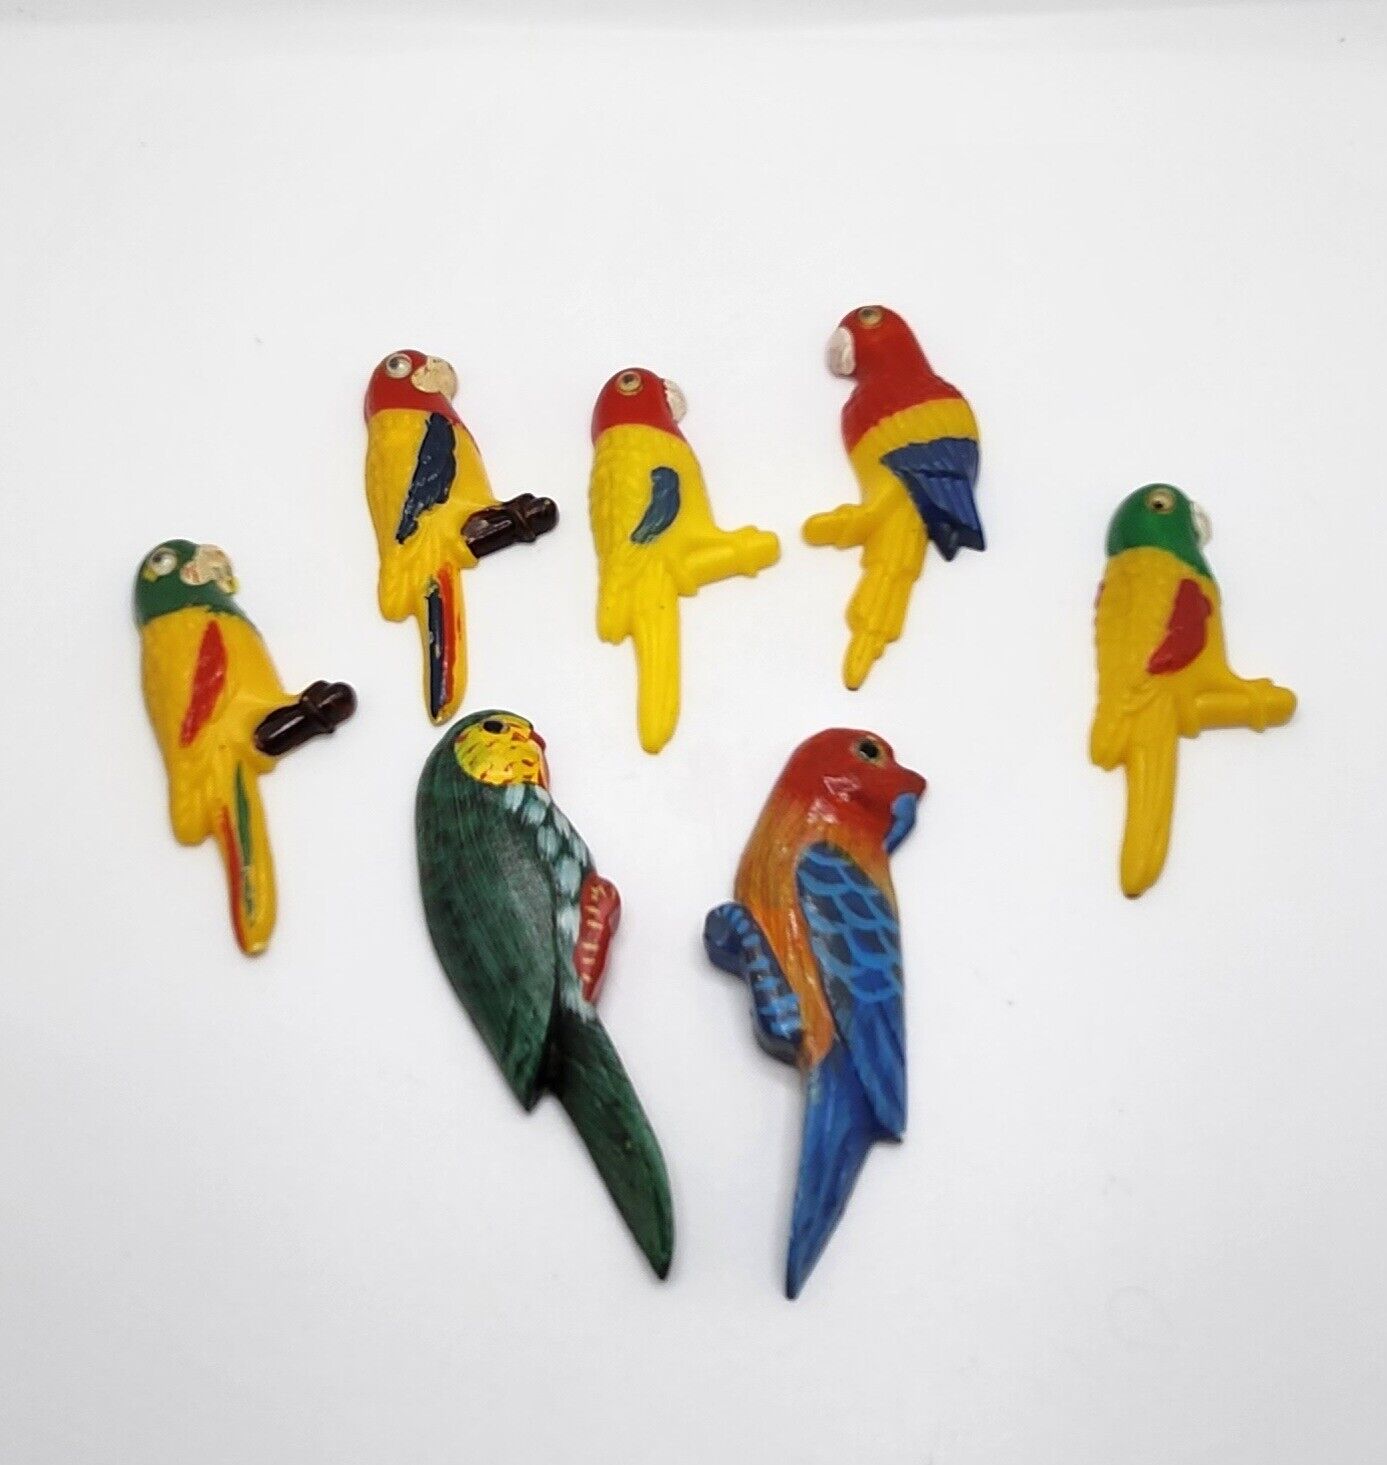 Plastic Googly Eye Parrot Refrigerator Magnets 5 & Wooden Parrot Magnets 2